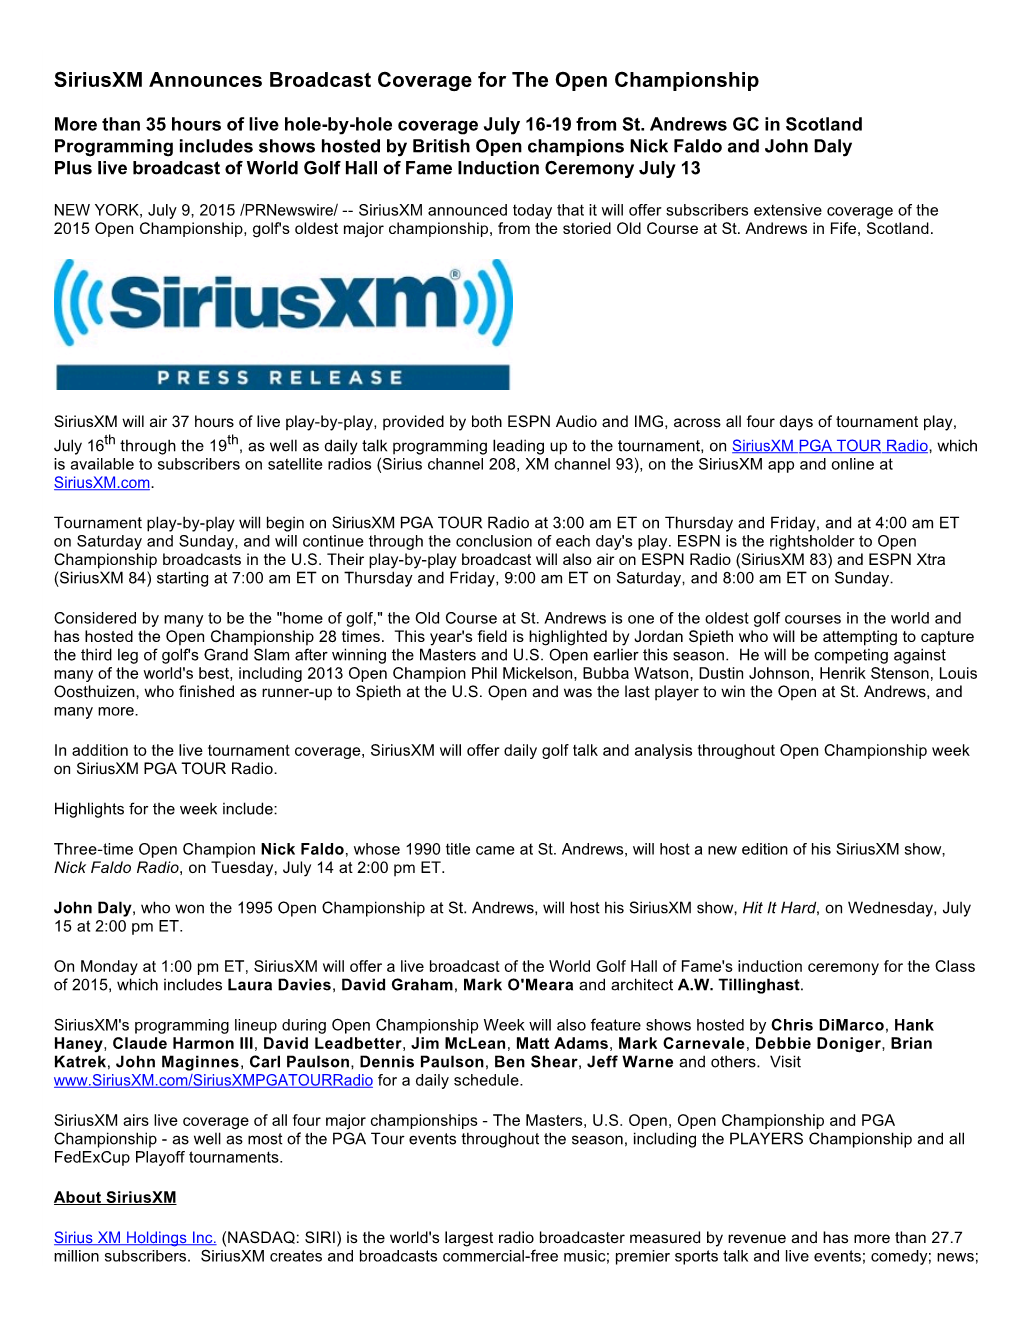 Siriusxm Announces Broadcast Coverage for the Open Championship